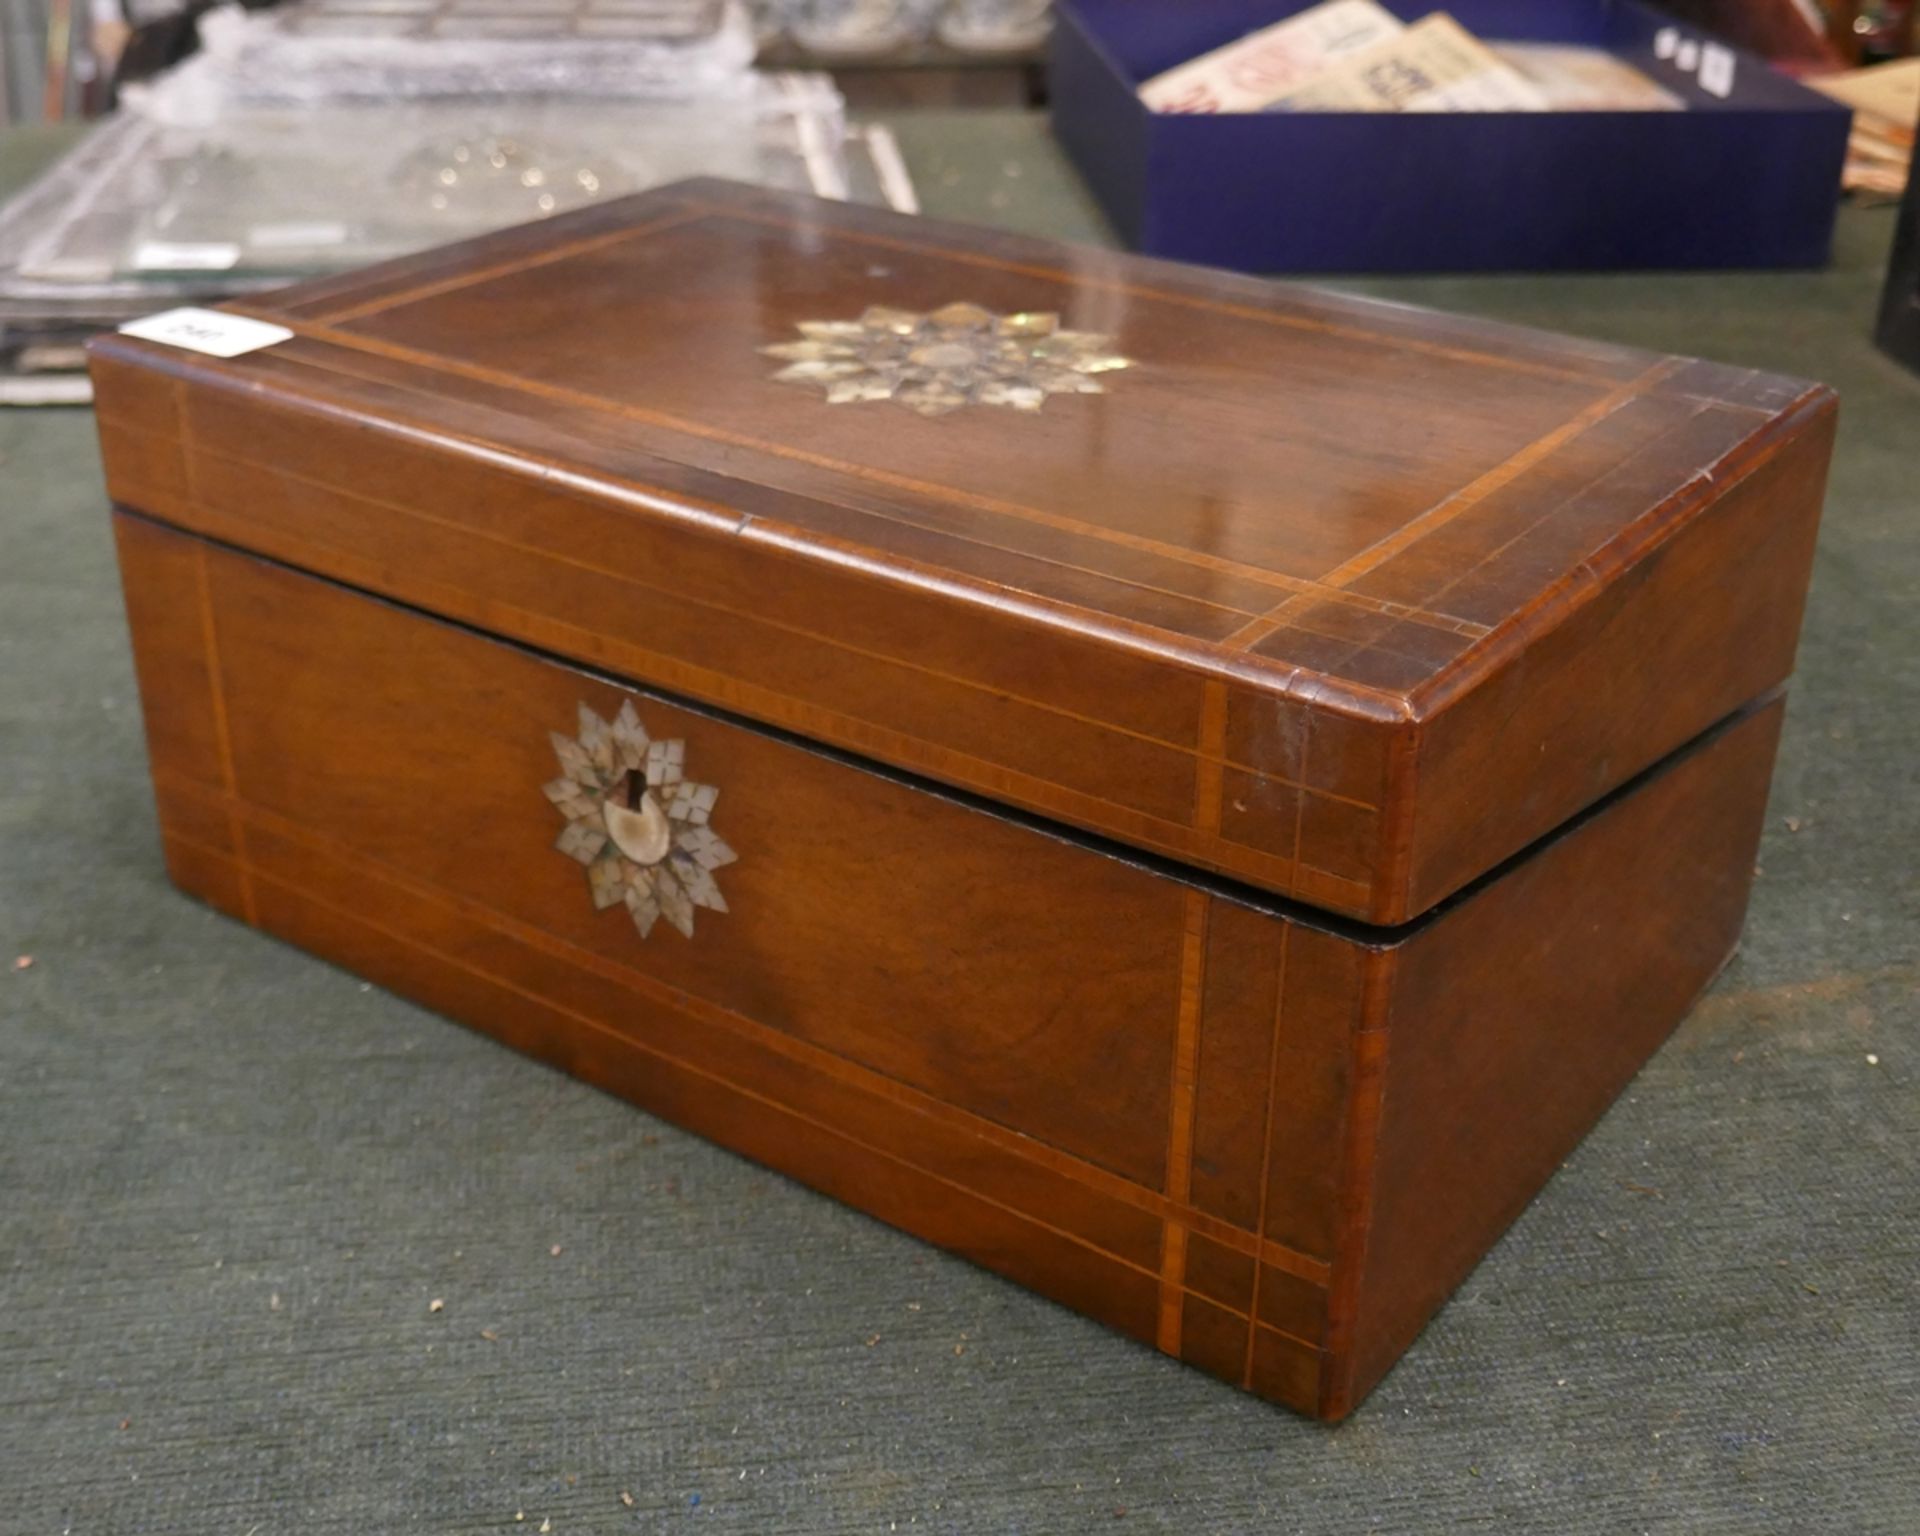 Writing box inlaid with mother-of-pearl